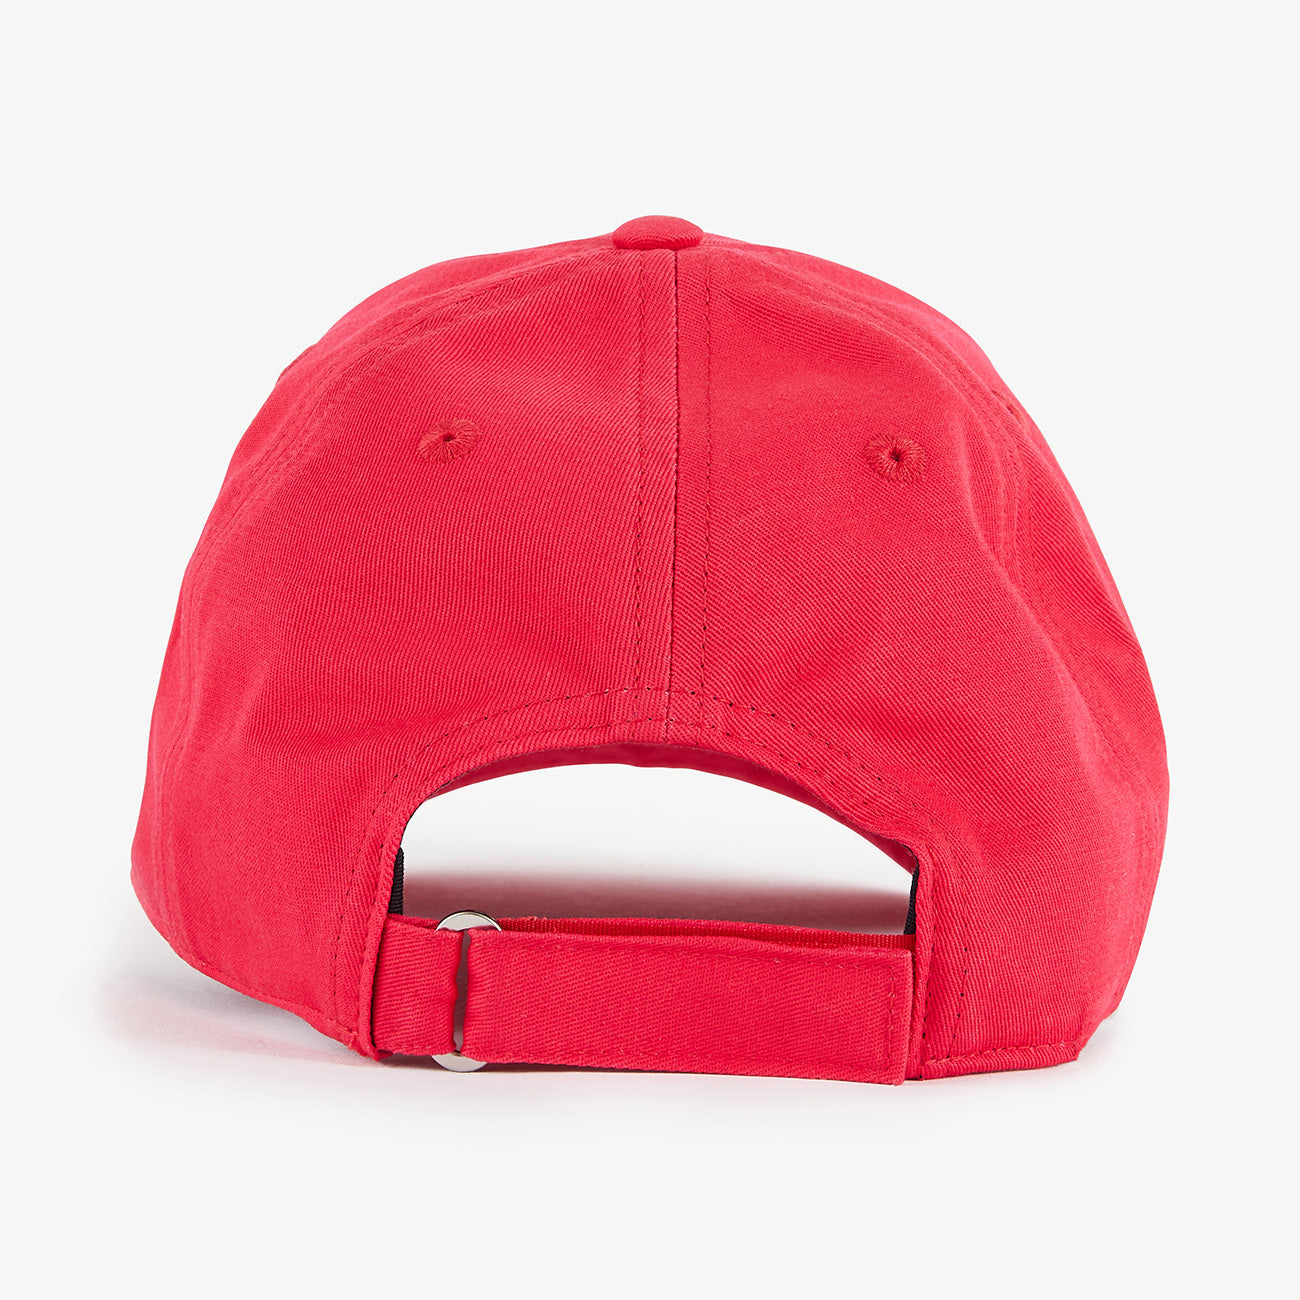 Eden Park Red Cotton Twill Baseball Cap crafted in a sturdy cotton twill, available at StylishGuy Menswear Dublin